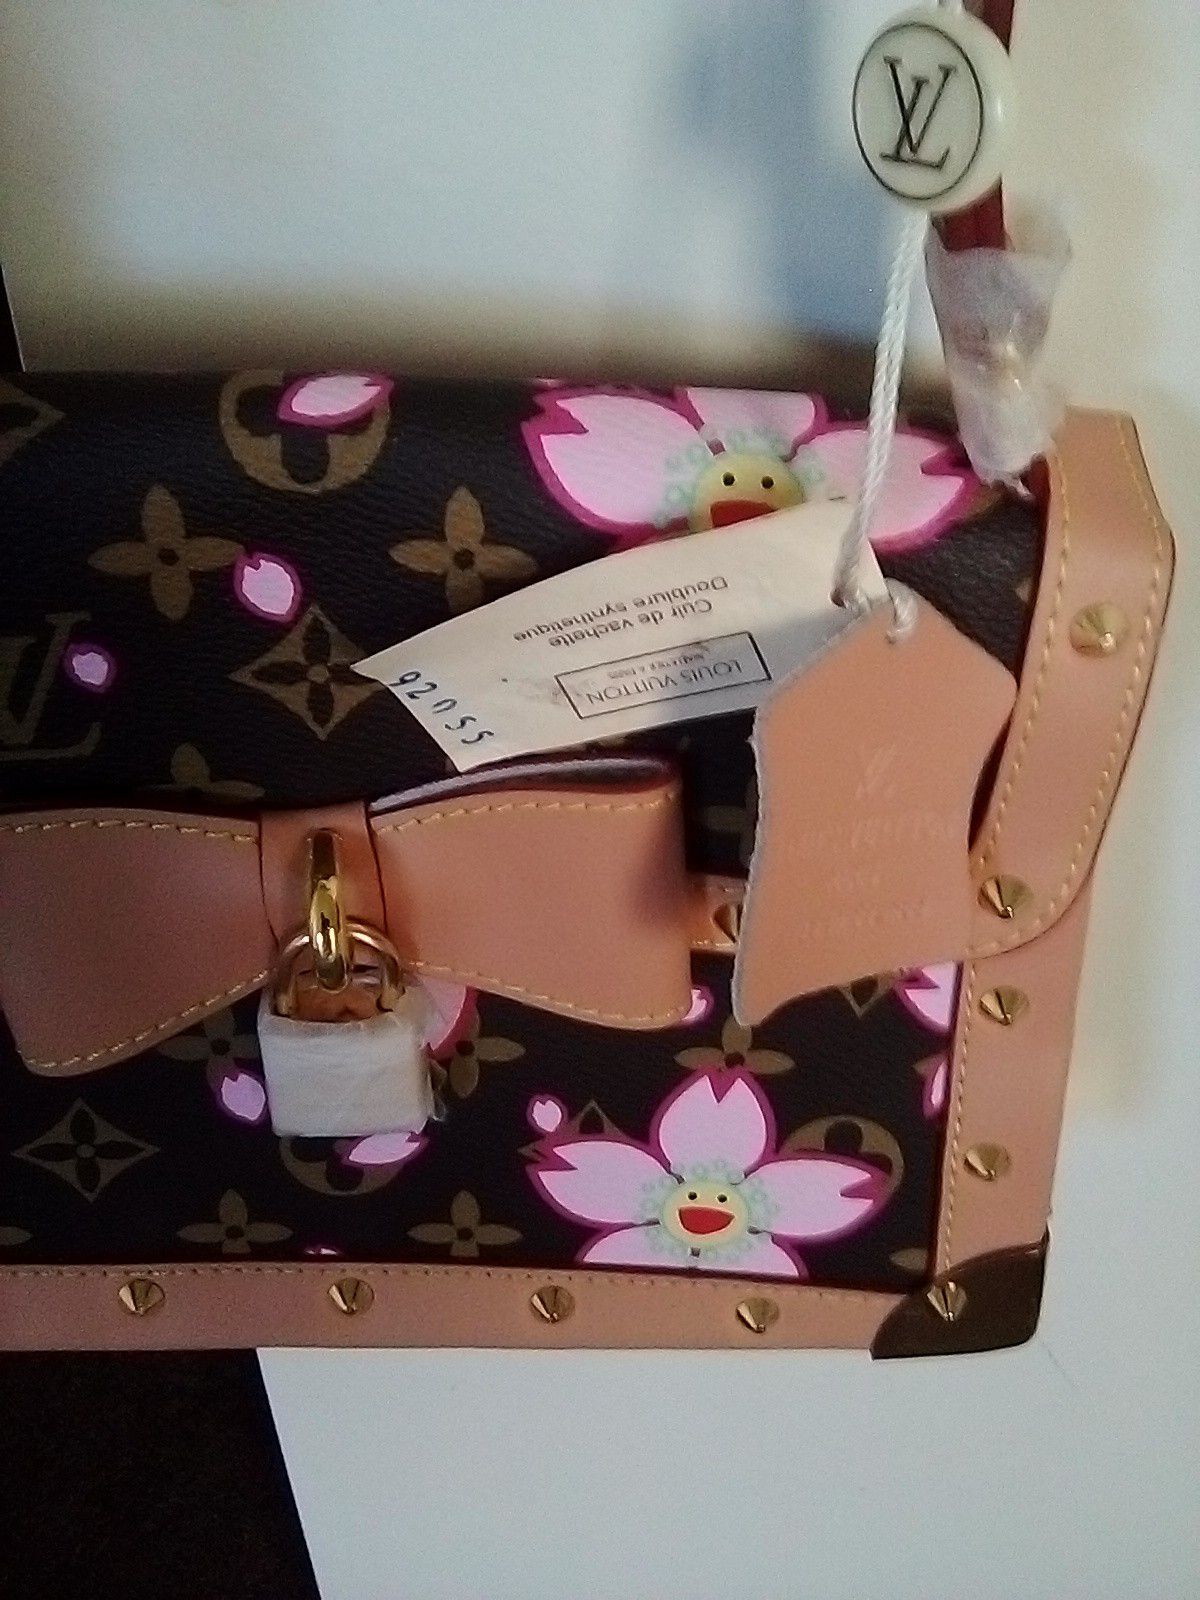 Louis Vuitton Neverfull Limited Edition Murakami for Sale in Morrisville,  NC - OfferUp